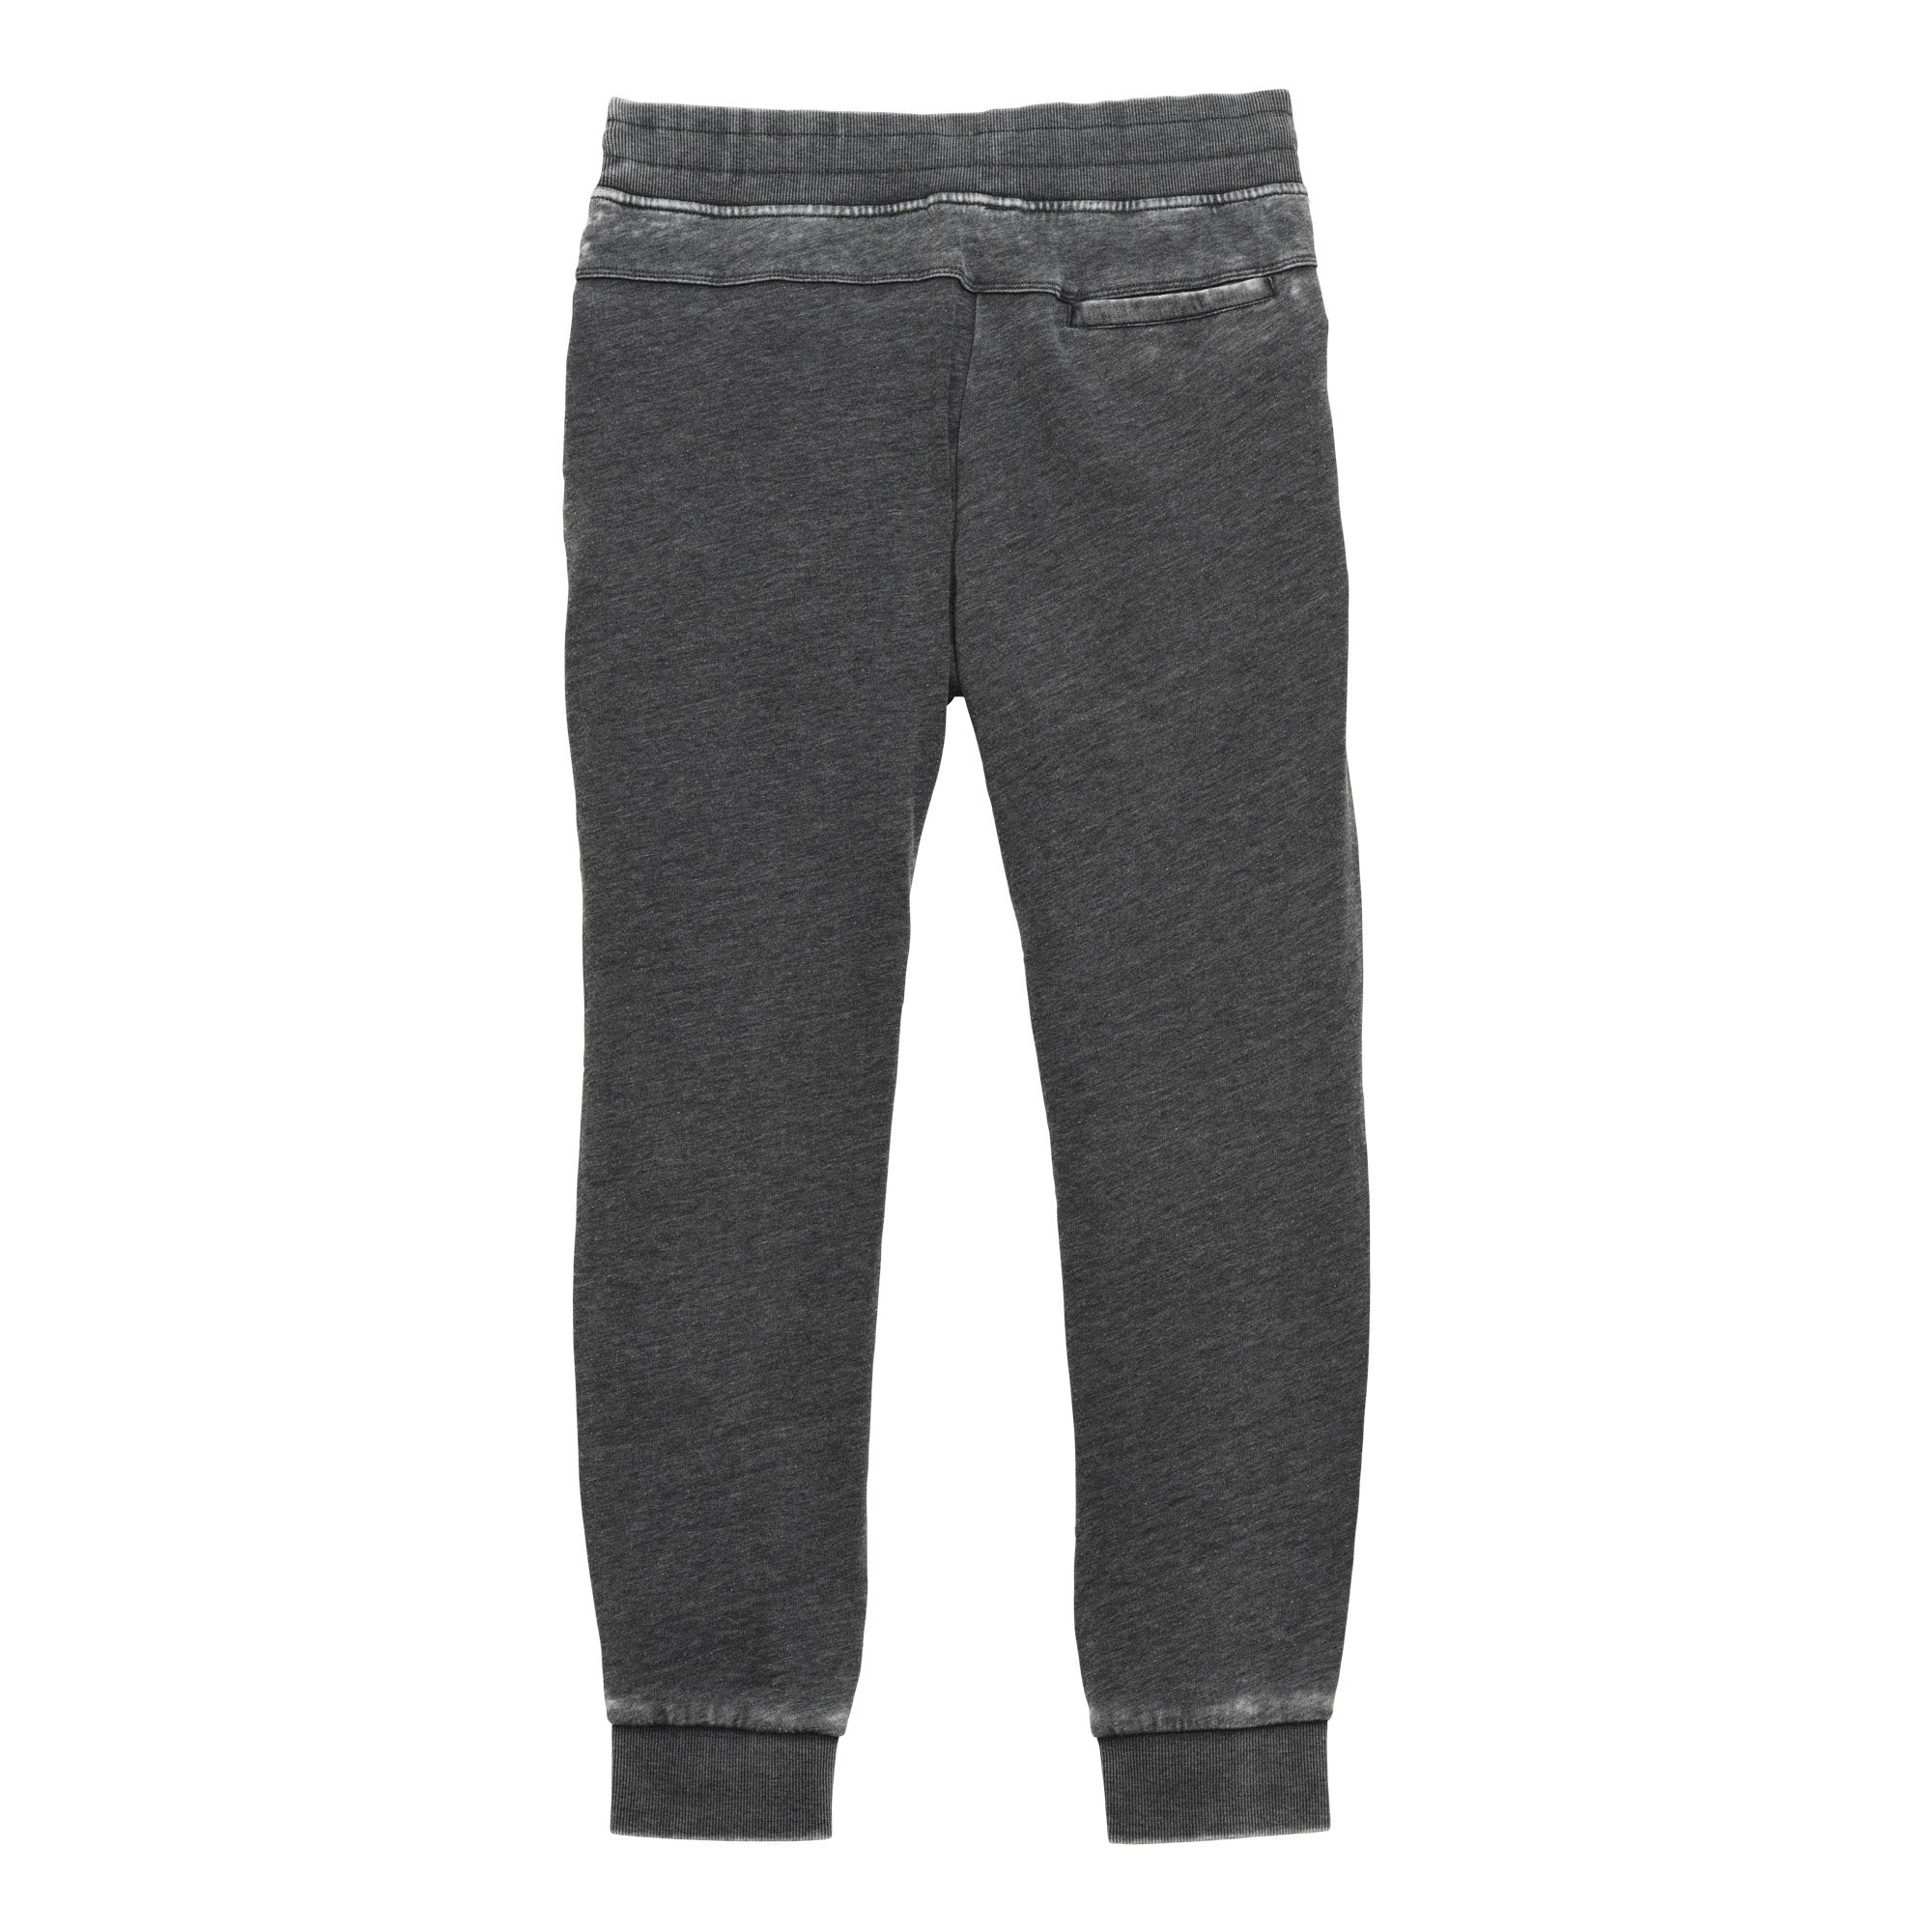 Everyday California Brutus Jogger in Grey back view